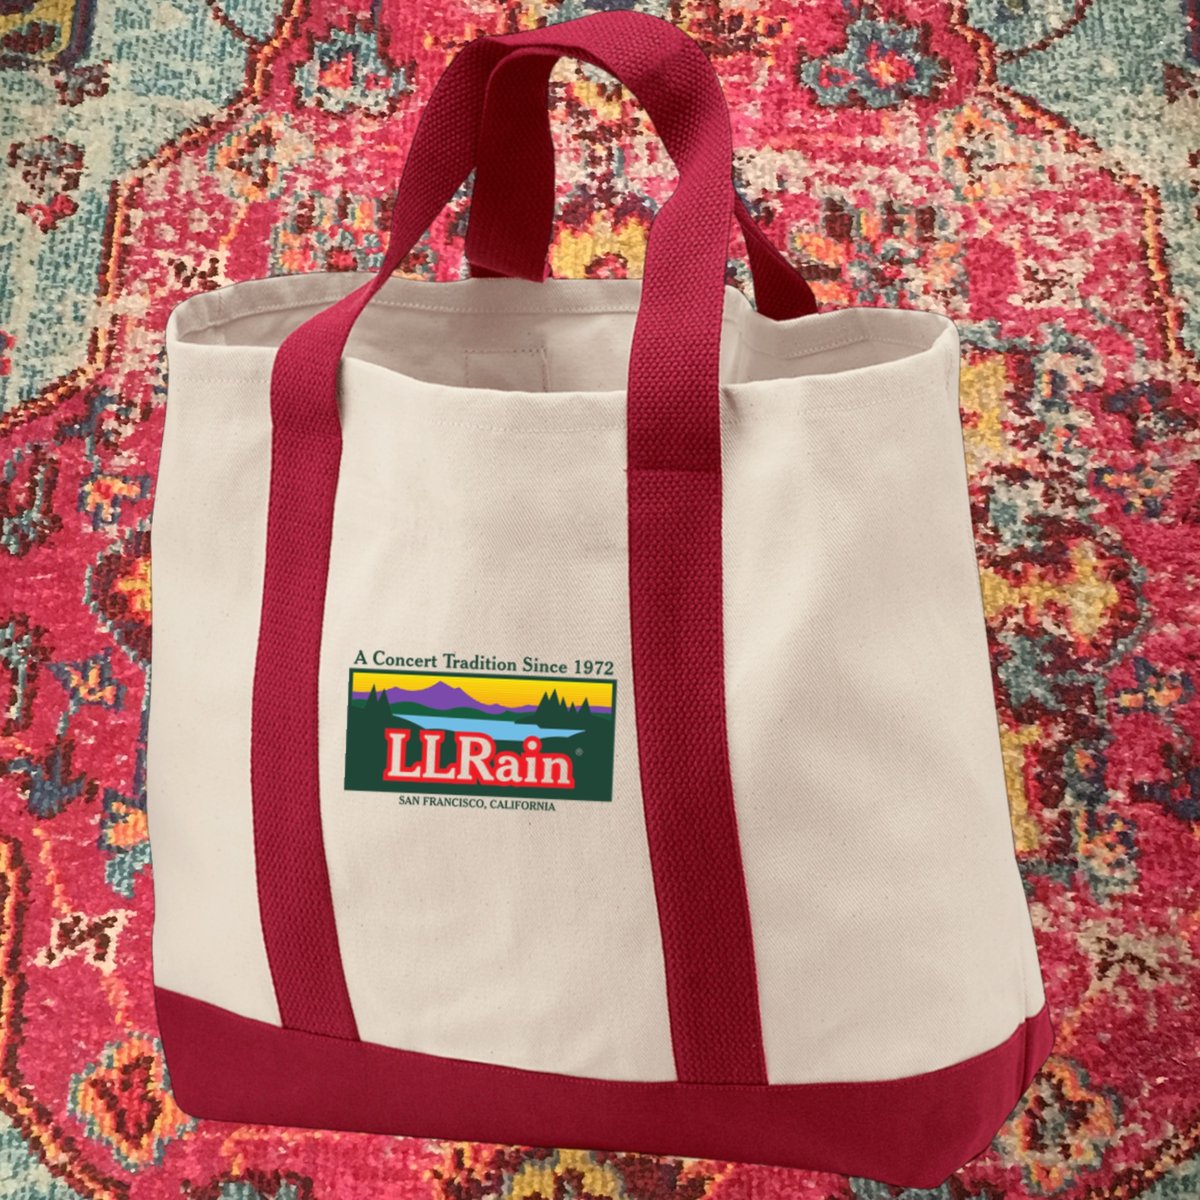 LL Rain Embroidered Tote Bags!!